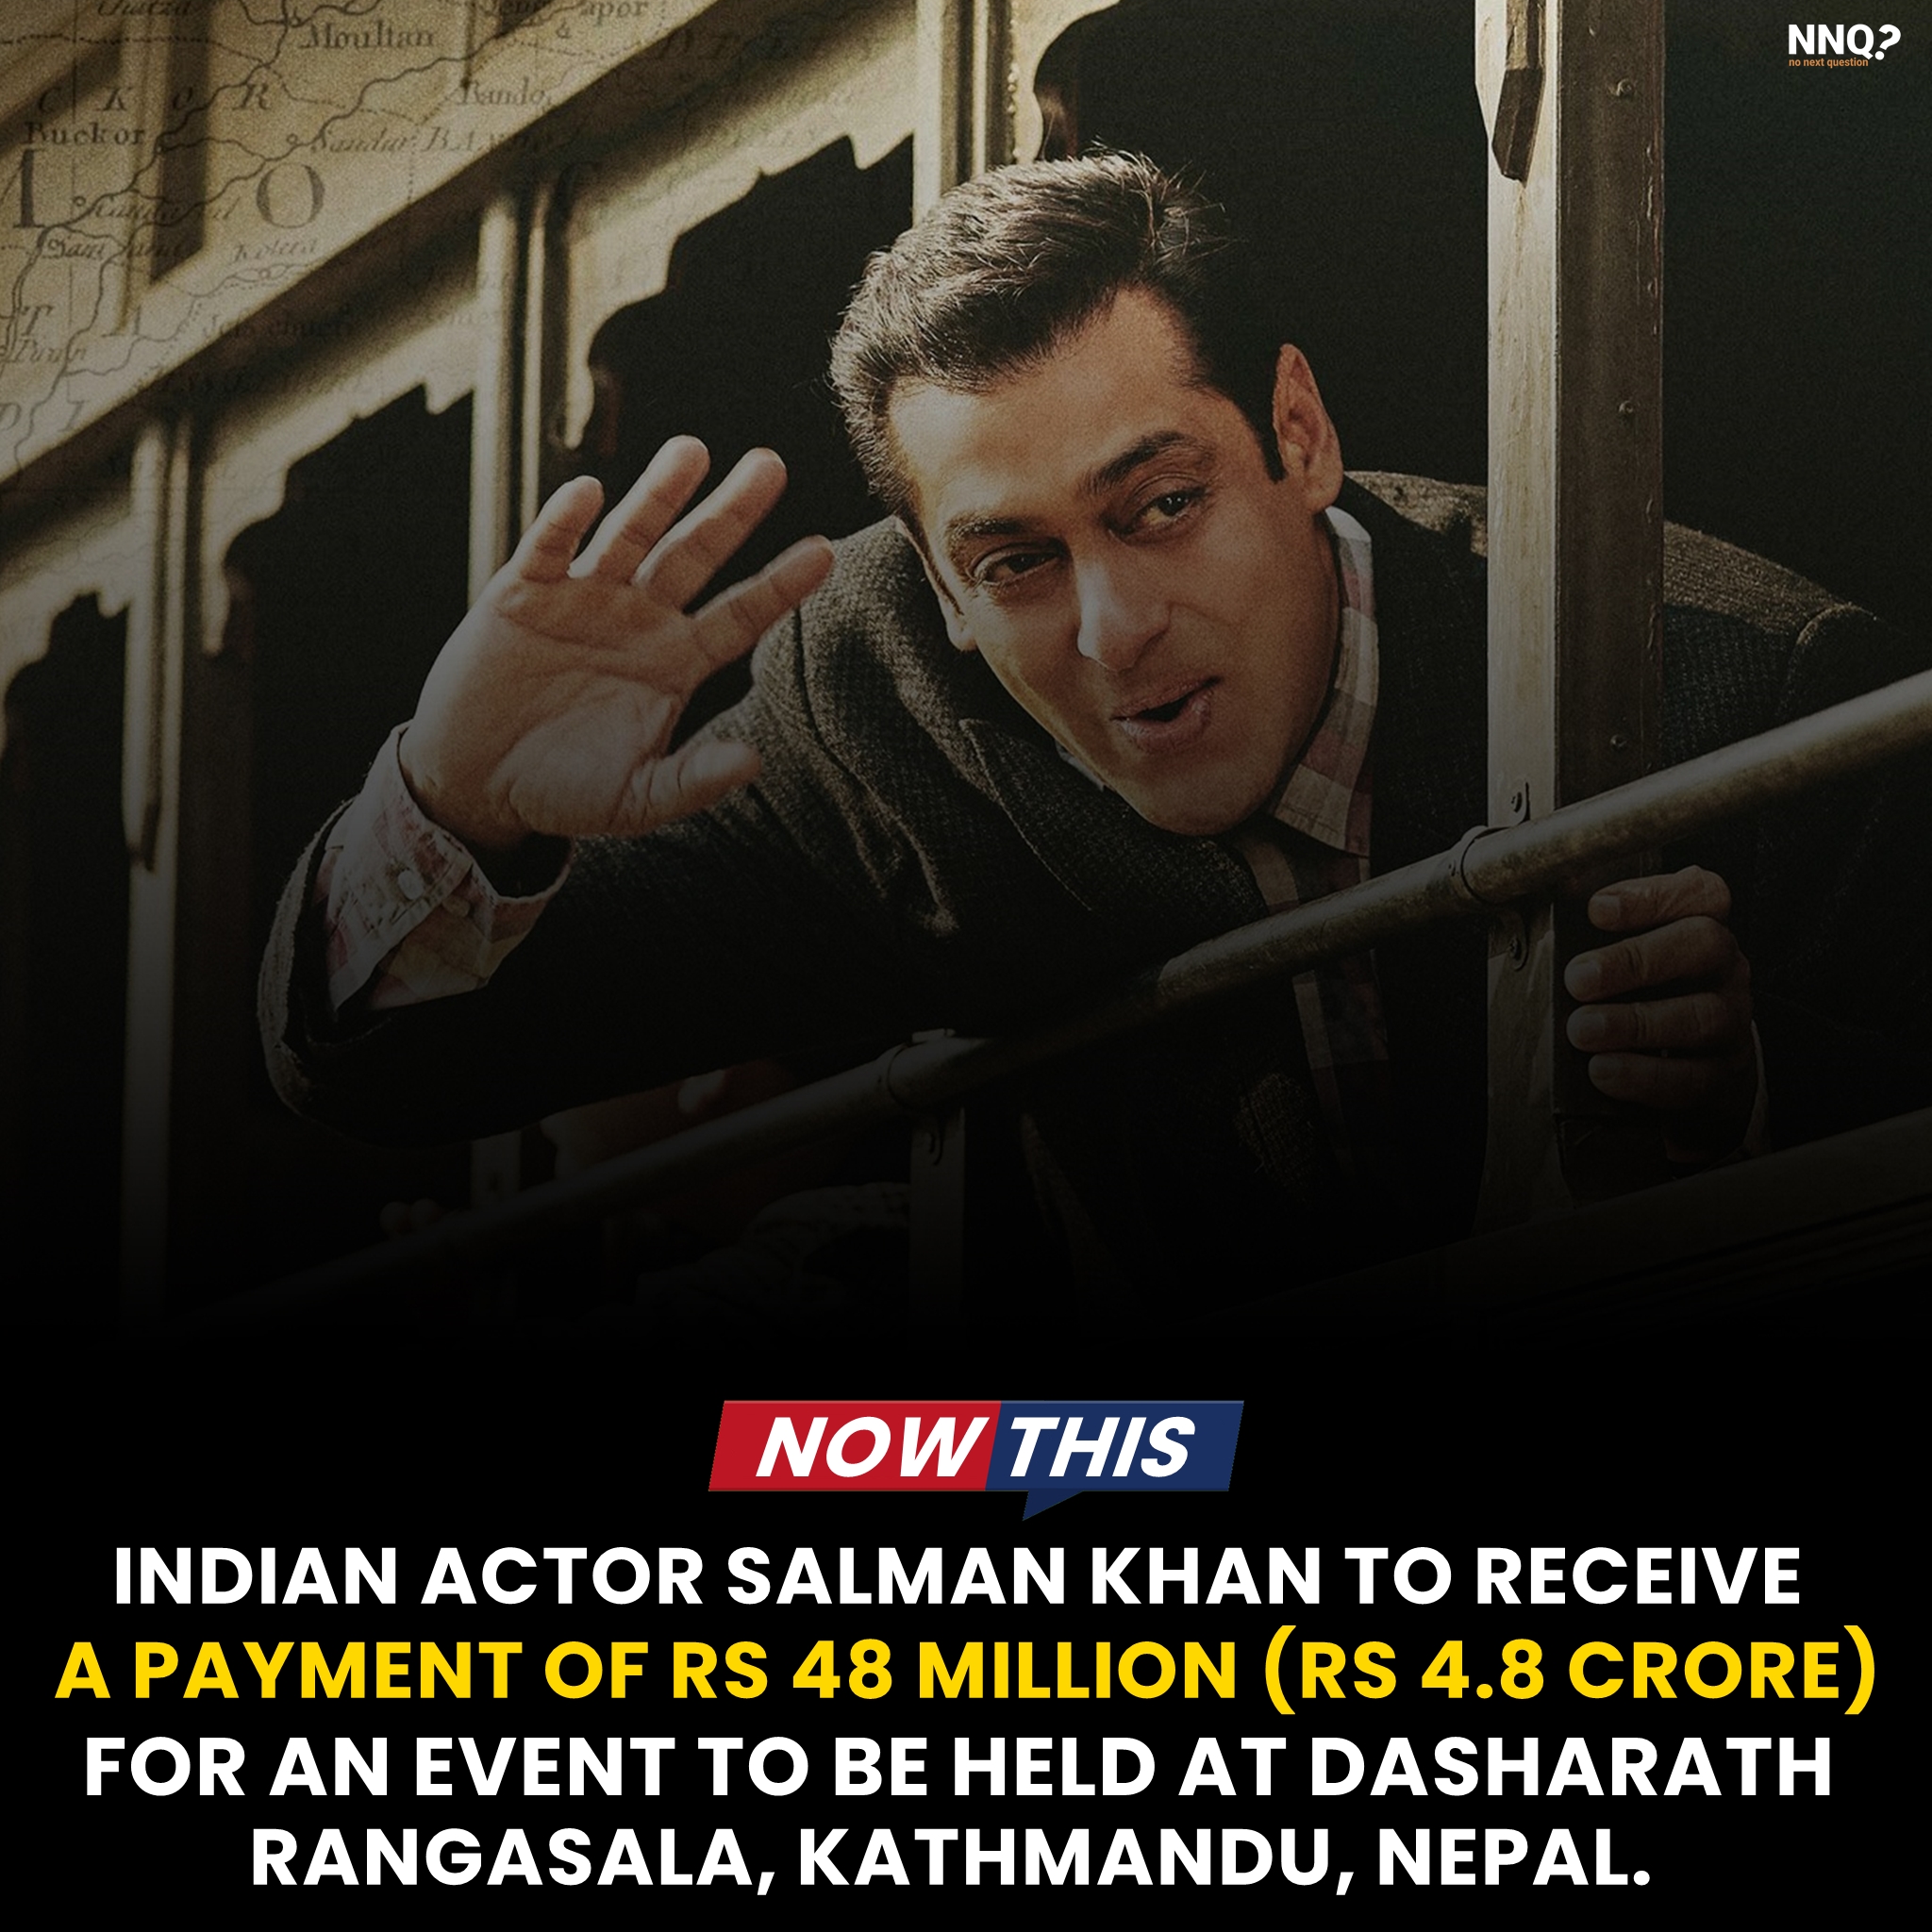 Salman Khan to receive whooping payment of Nepali Rupees 48 million for an event in Nepal